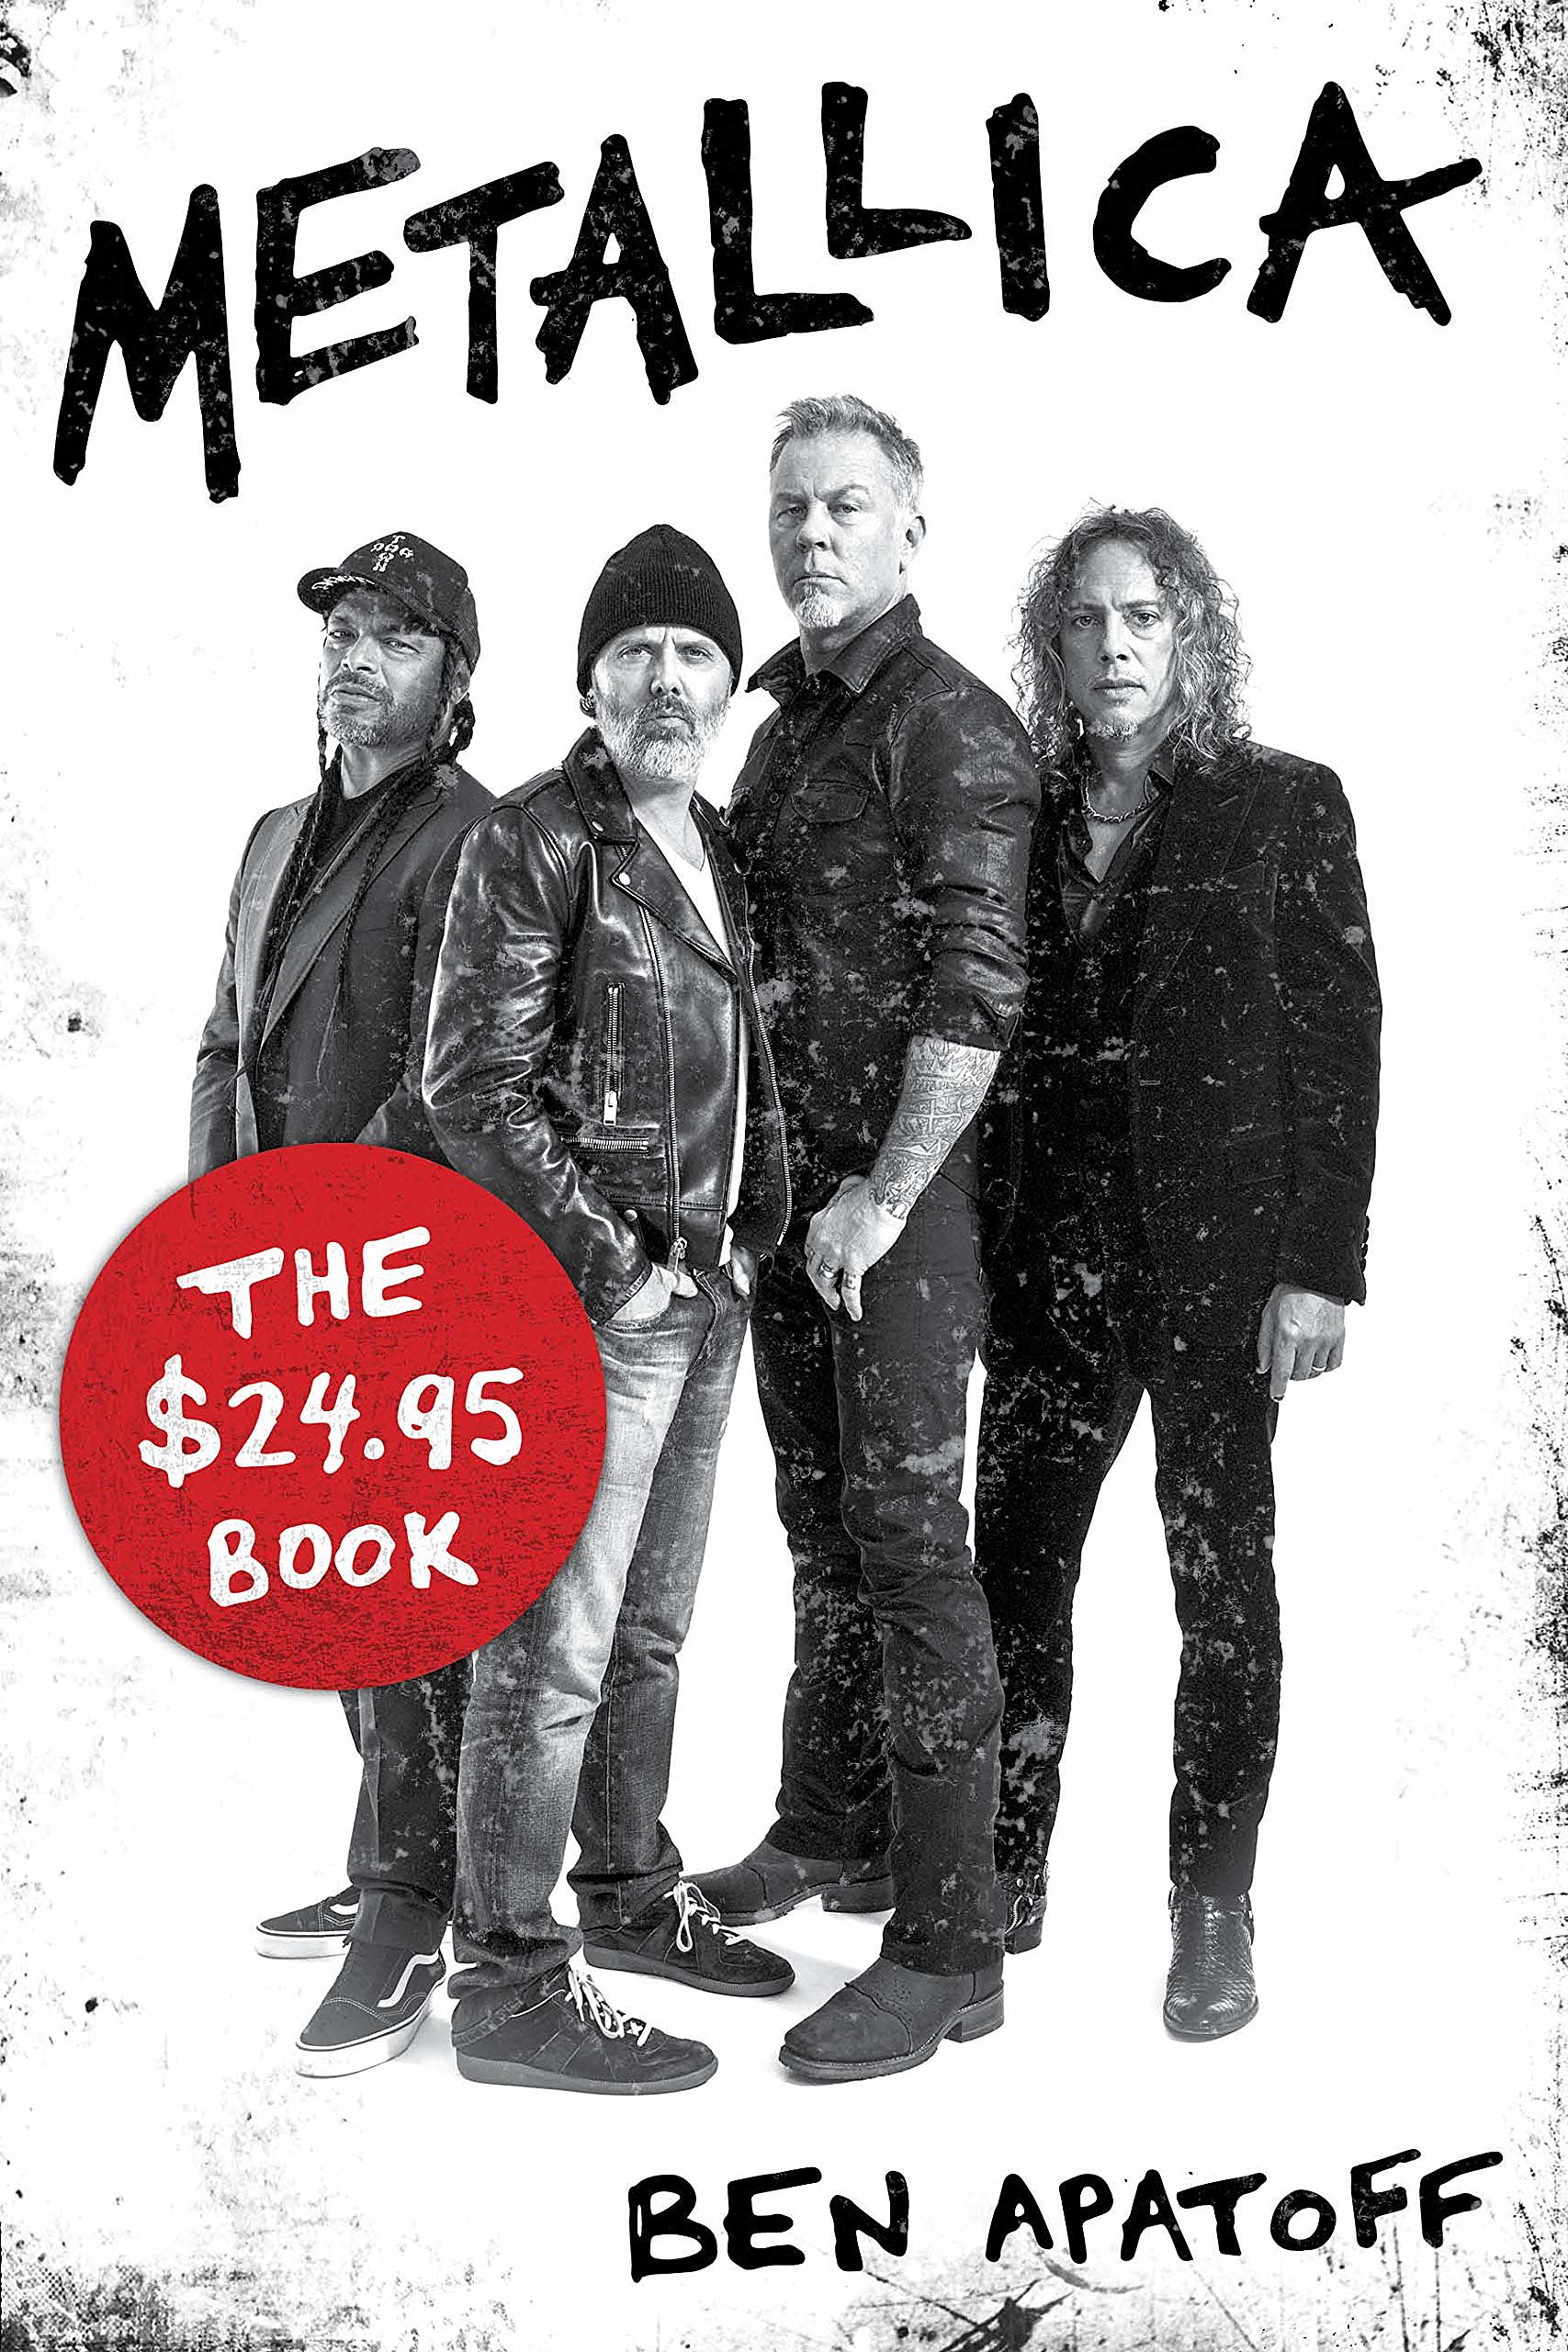 New Metallica Book The 24 95 Book Is Coming Out This Summer